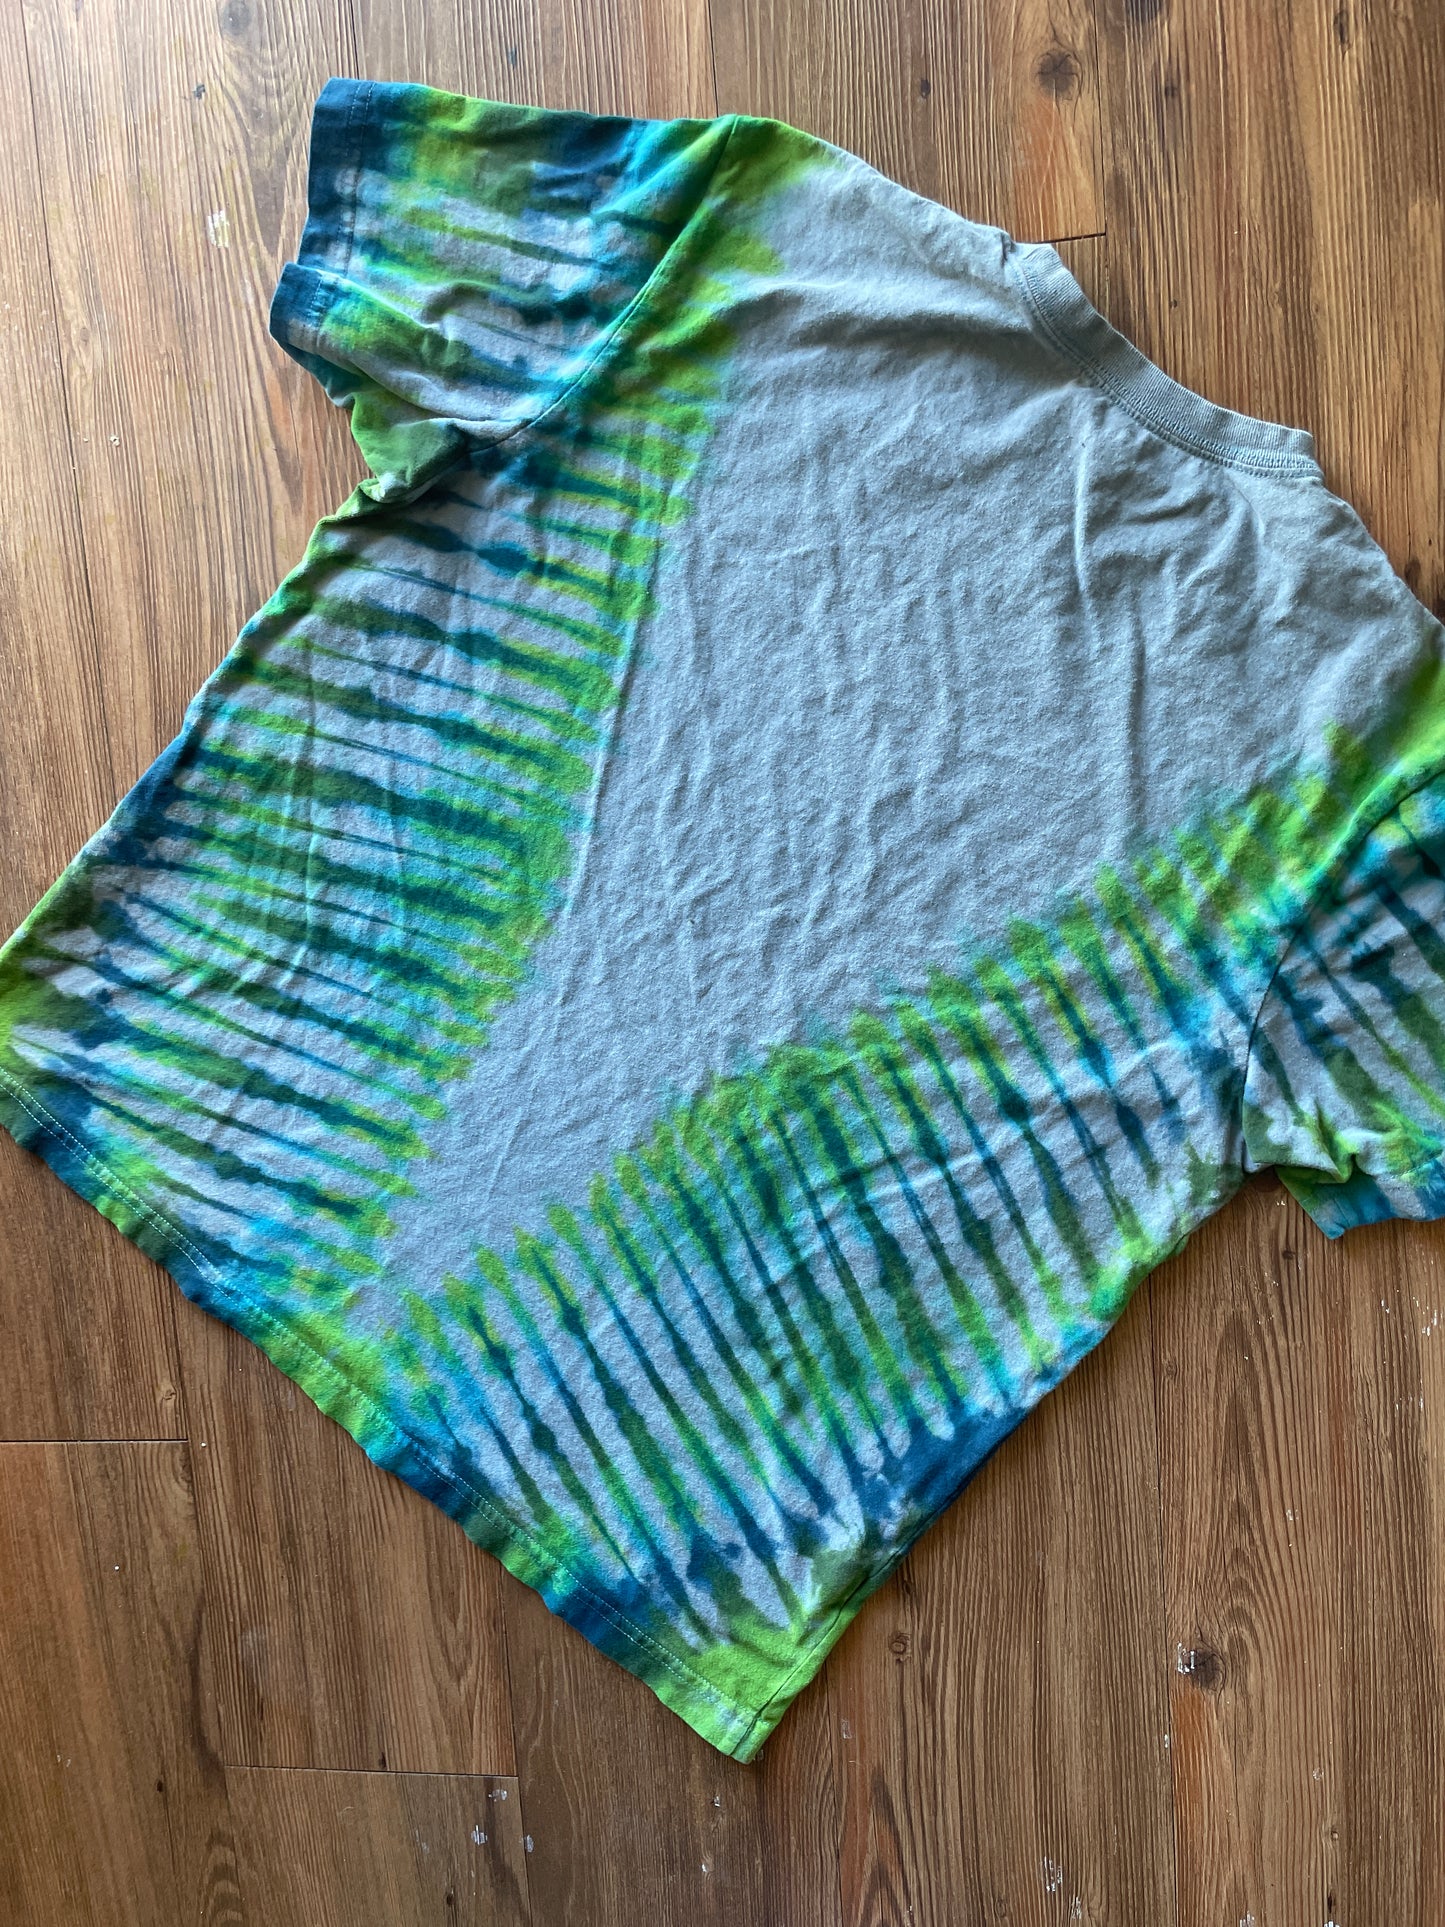 LARGE Men’s Eddie Bauer Handmade Tie Dye T-Shirt | One-Of-a-Kind Gray, Blue, and Green Short Sleeve